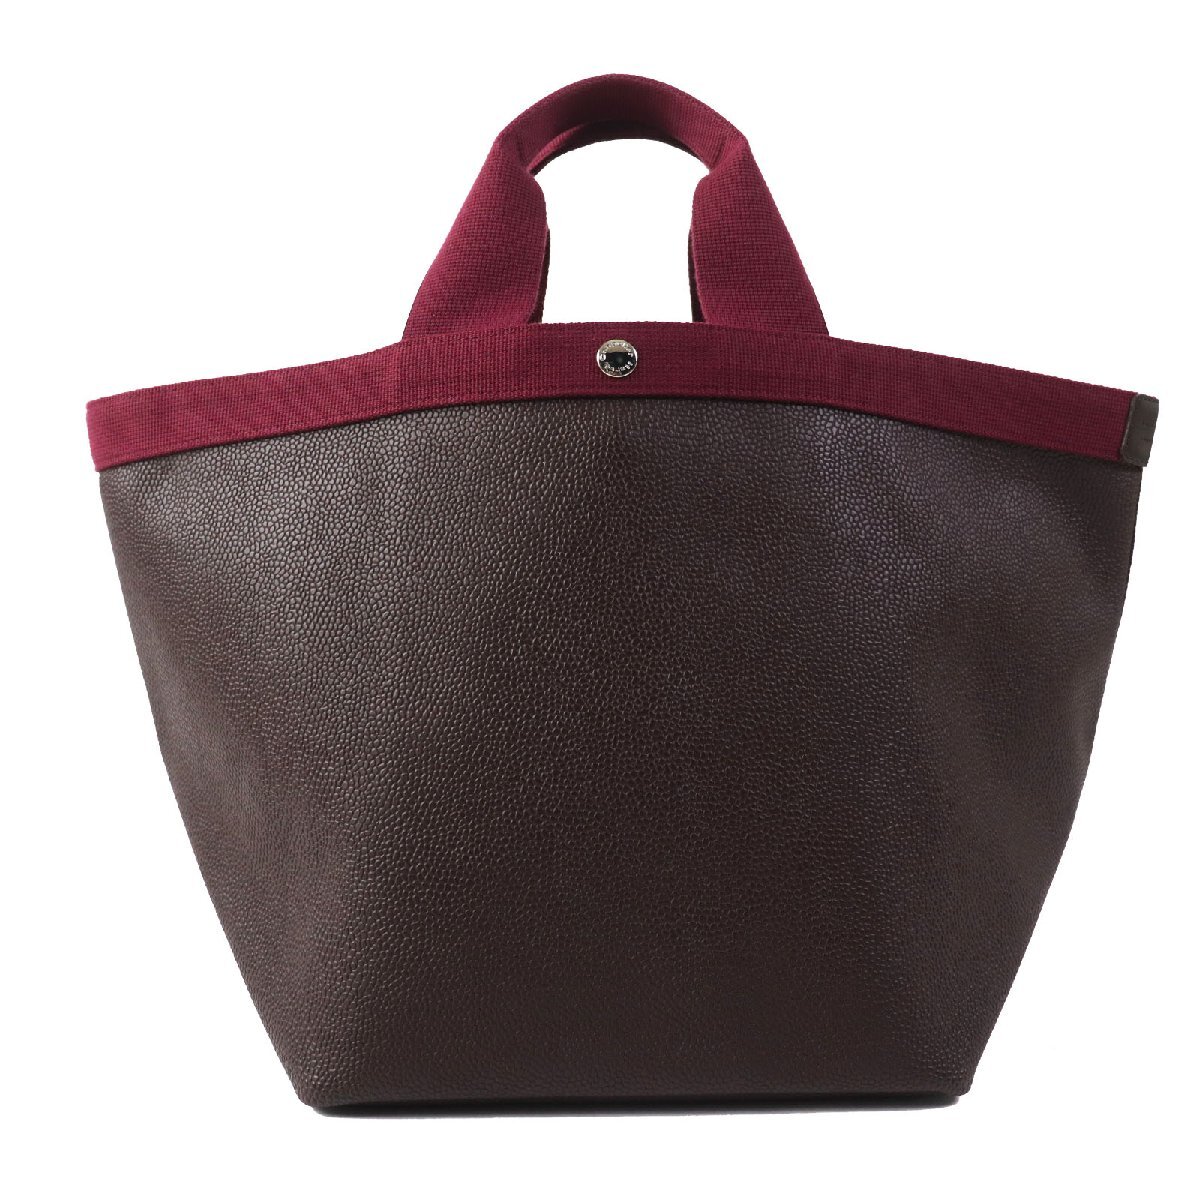  beautiful goods HERVE CHAPELIER Herve Chapelier 725GPko-tedo canvas boat type tote bag Brown bordeaux storage bag attaching . made lady's 